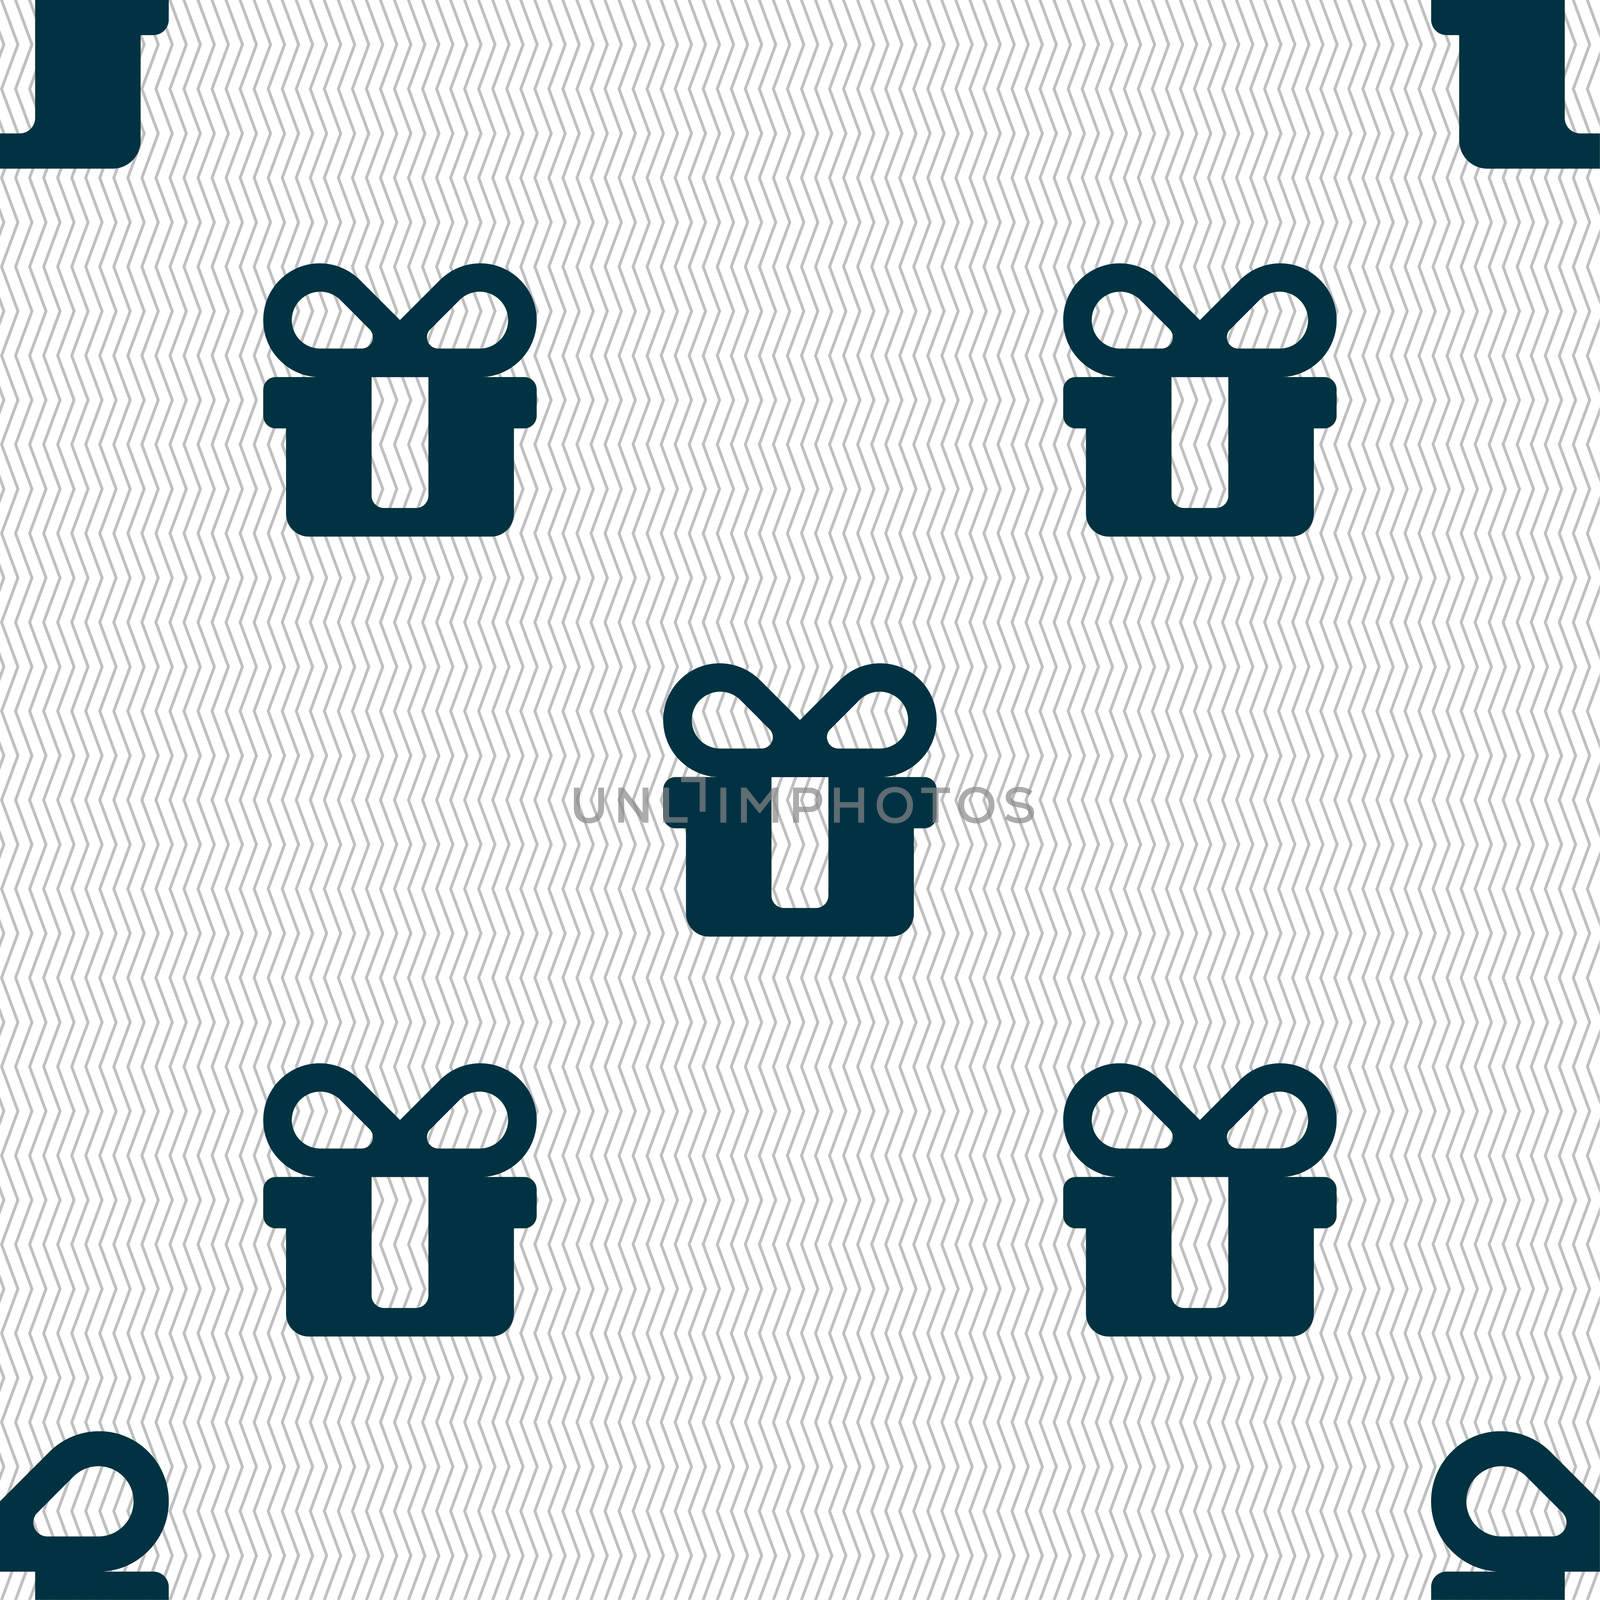 gift icon sign. Seamless pattern with geometric texture. illustration